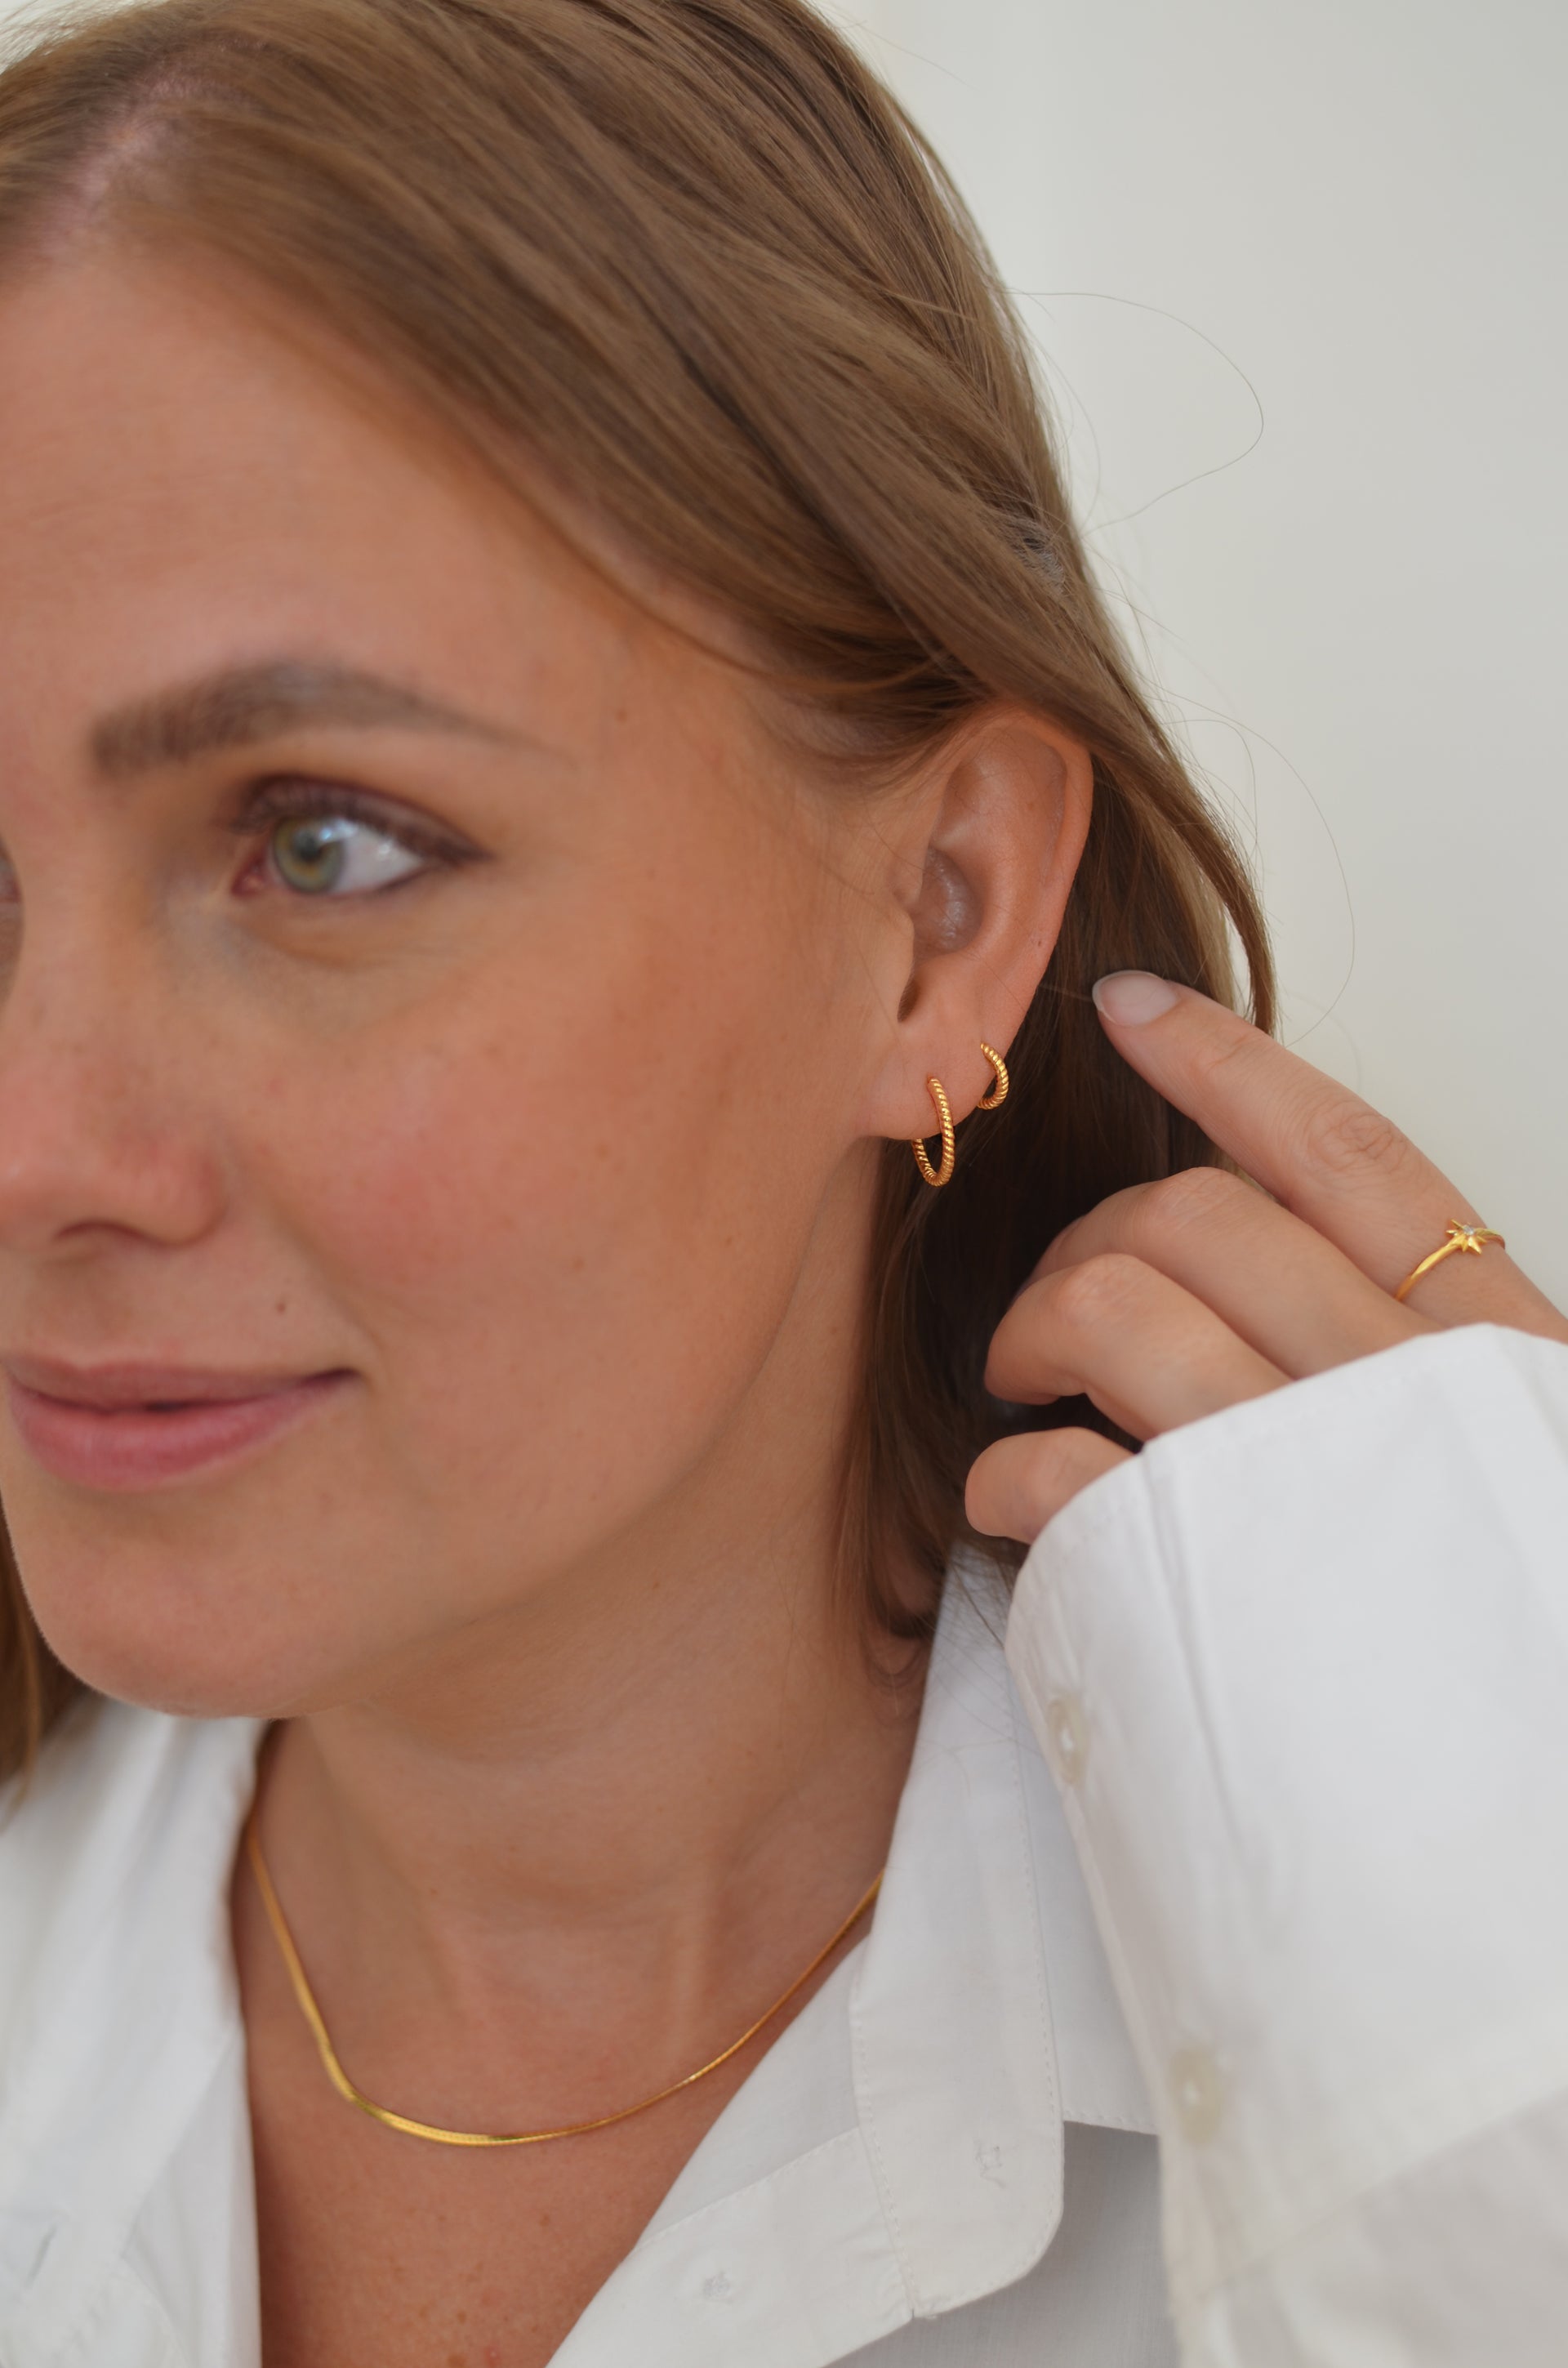 To twisted gold hoops in two different sizes, one medium and one small